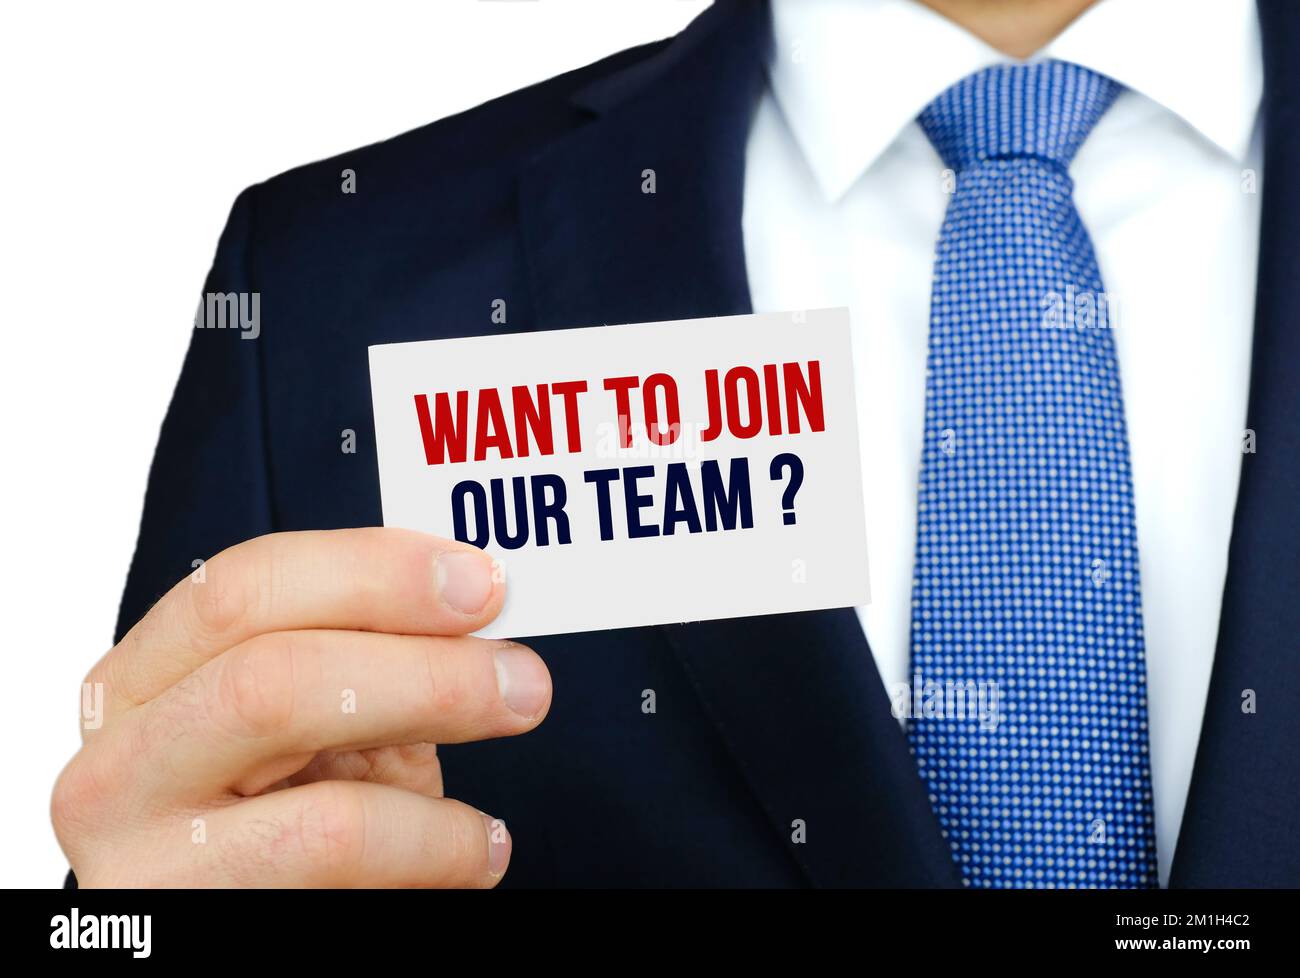 Want to join our team - business job offer Stock Photo